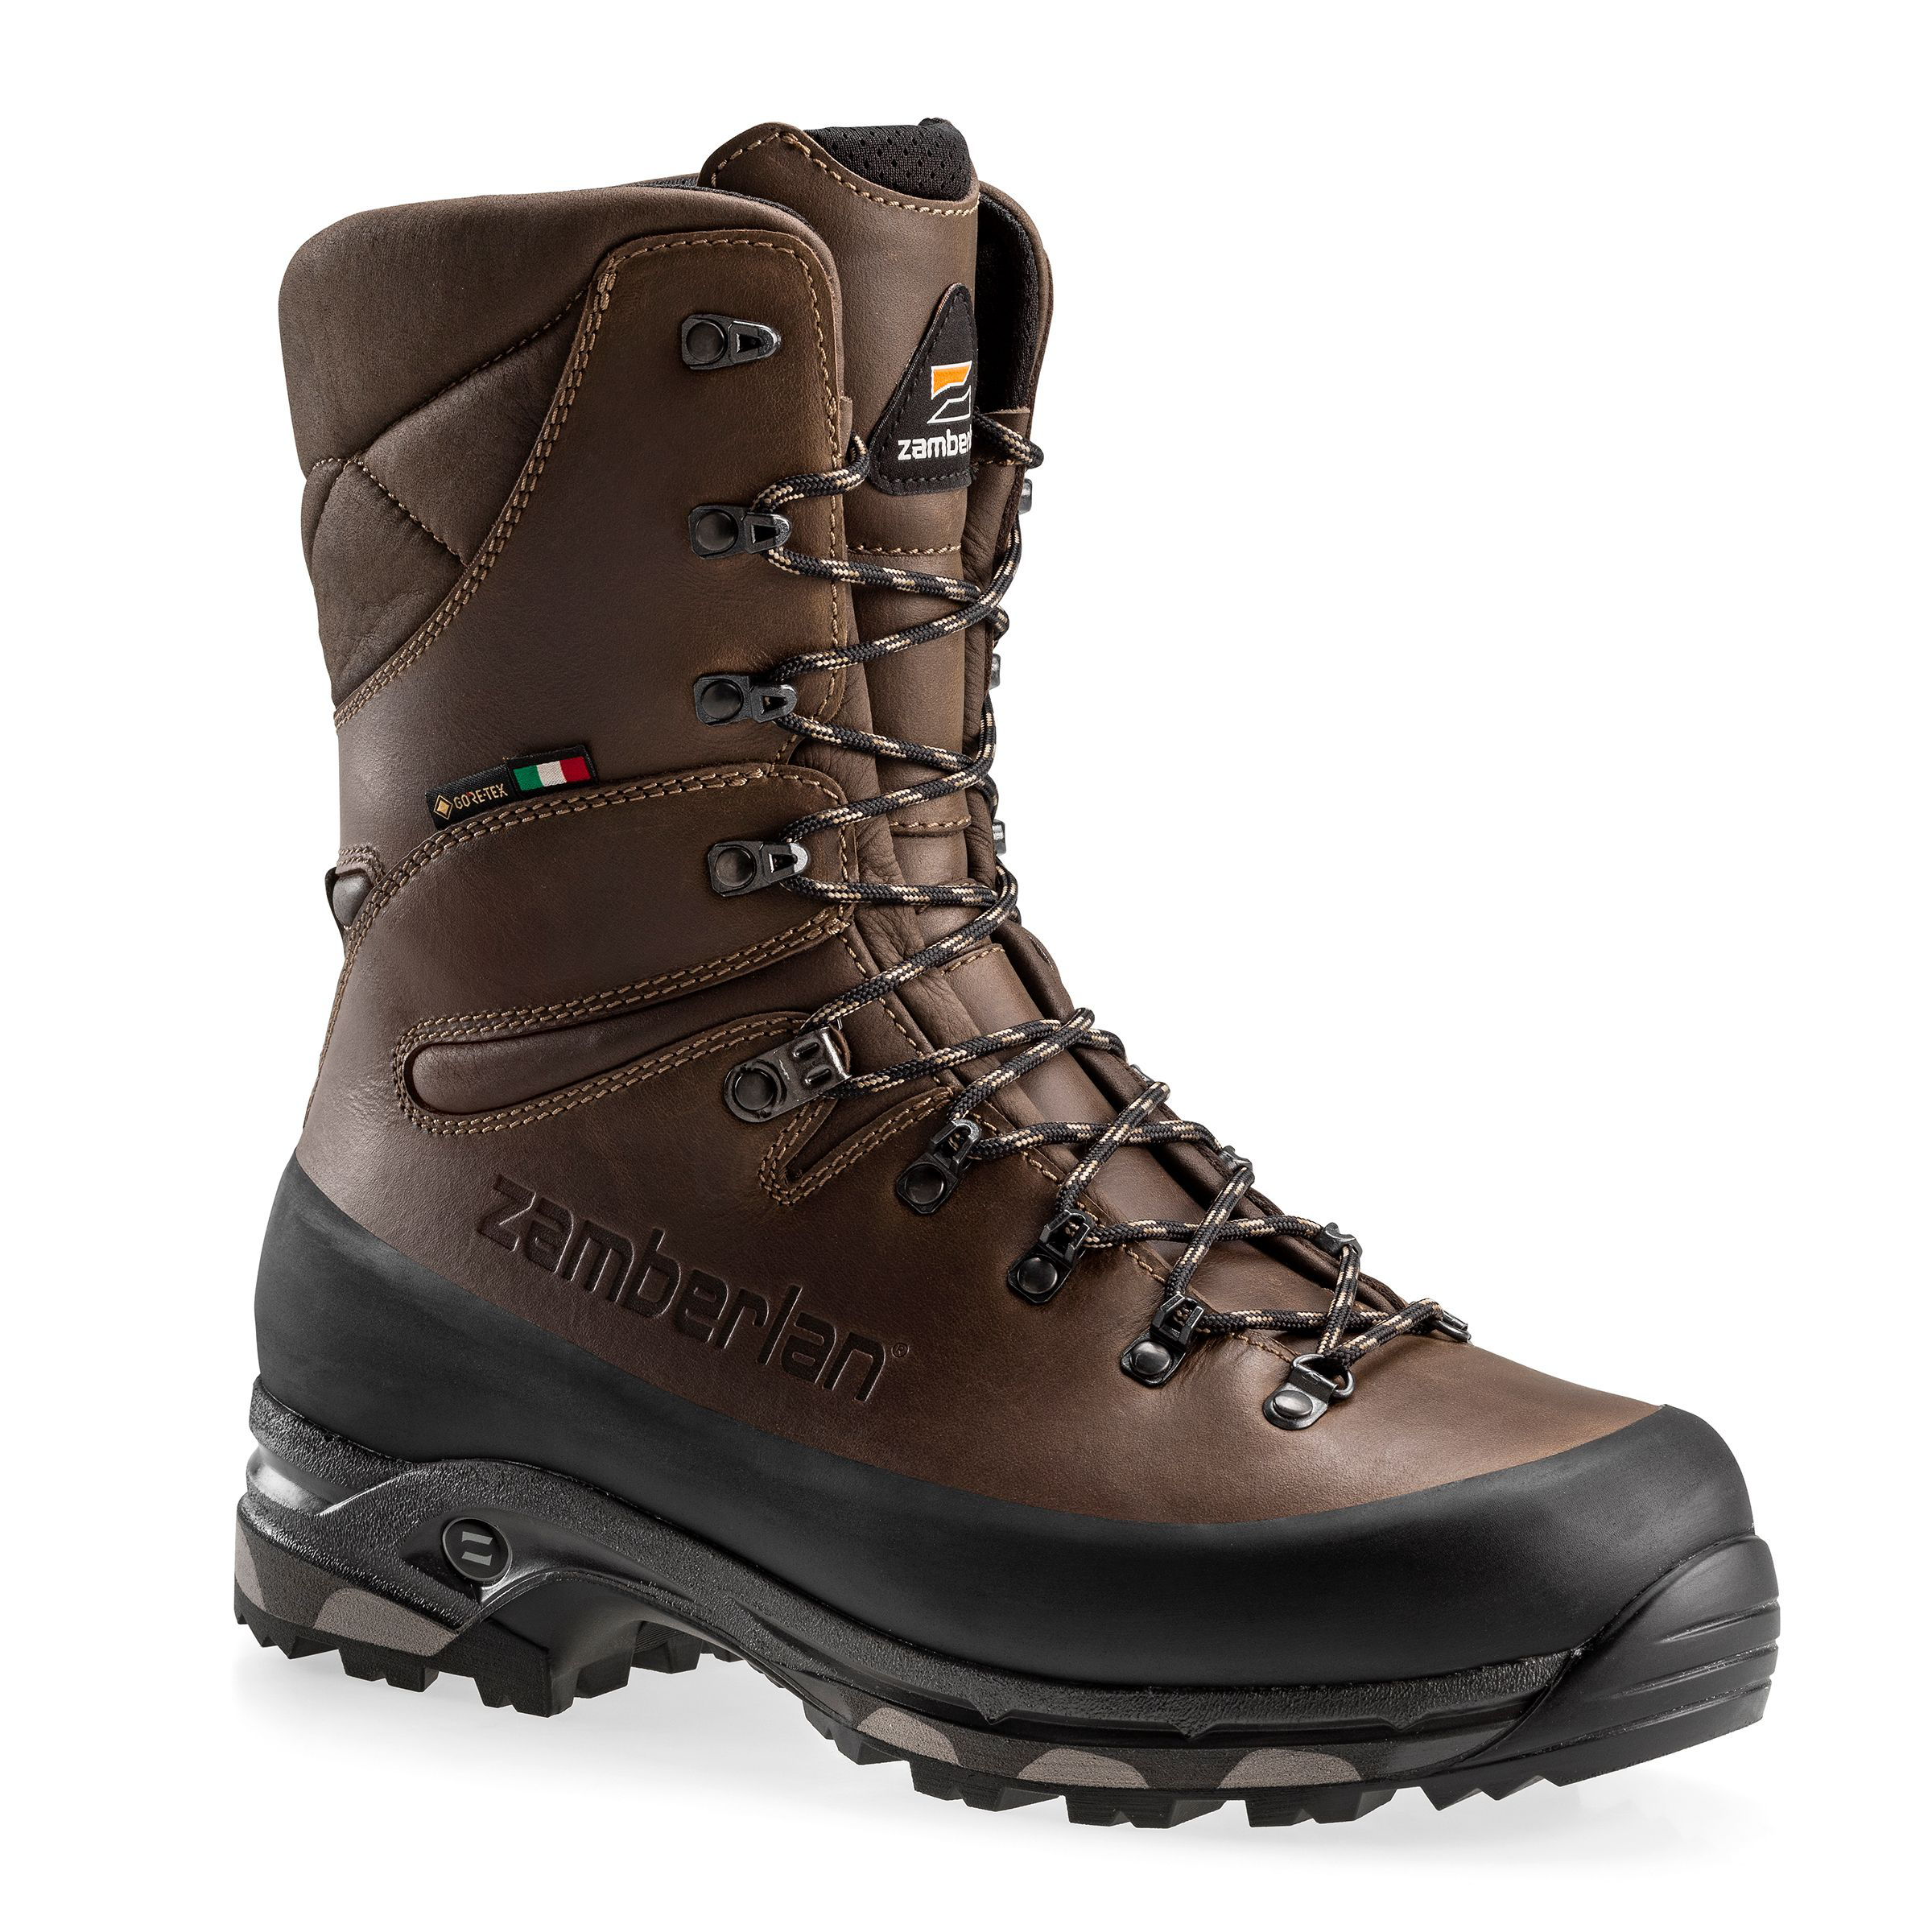 Zamberlan 1005 Hunter Pro GTX RR WL GORE-TEX Insulated Hunting Boots for Men - Brown - 10.5W